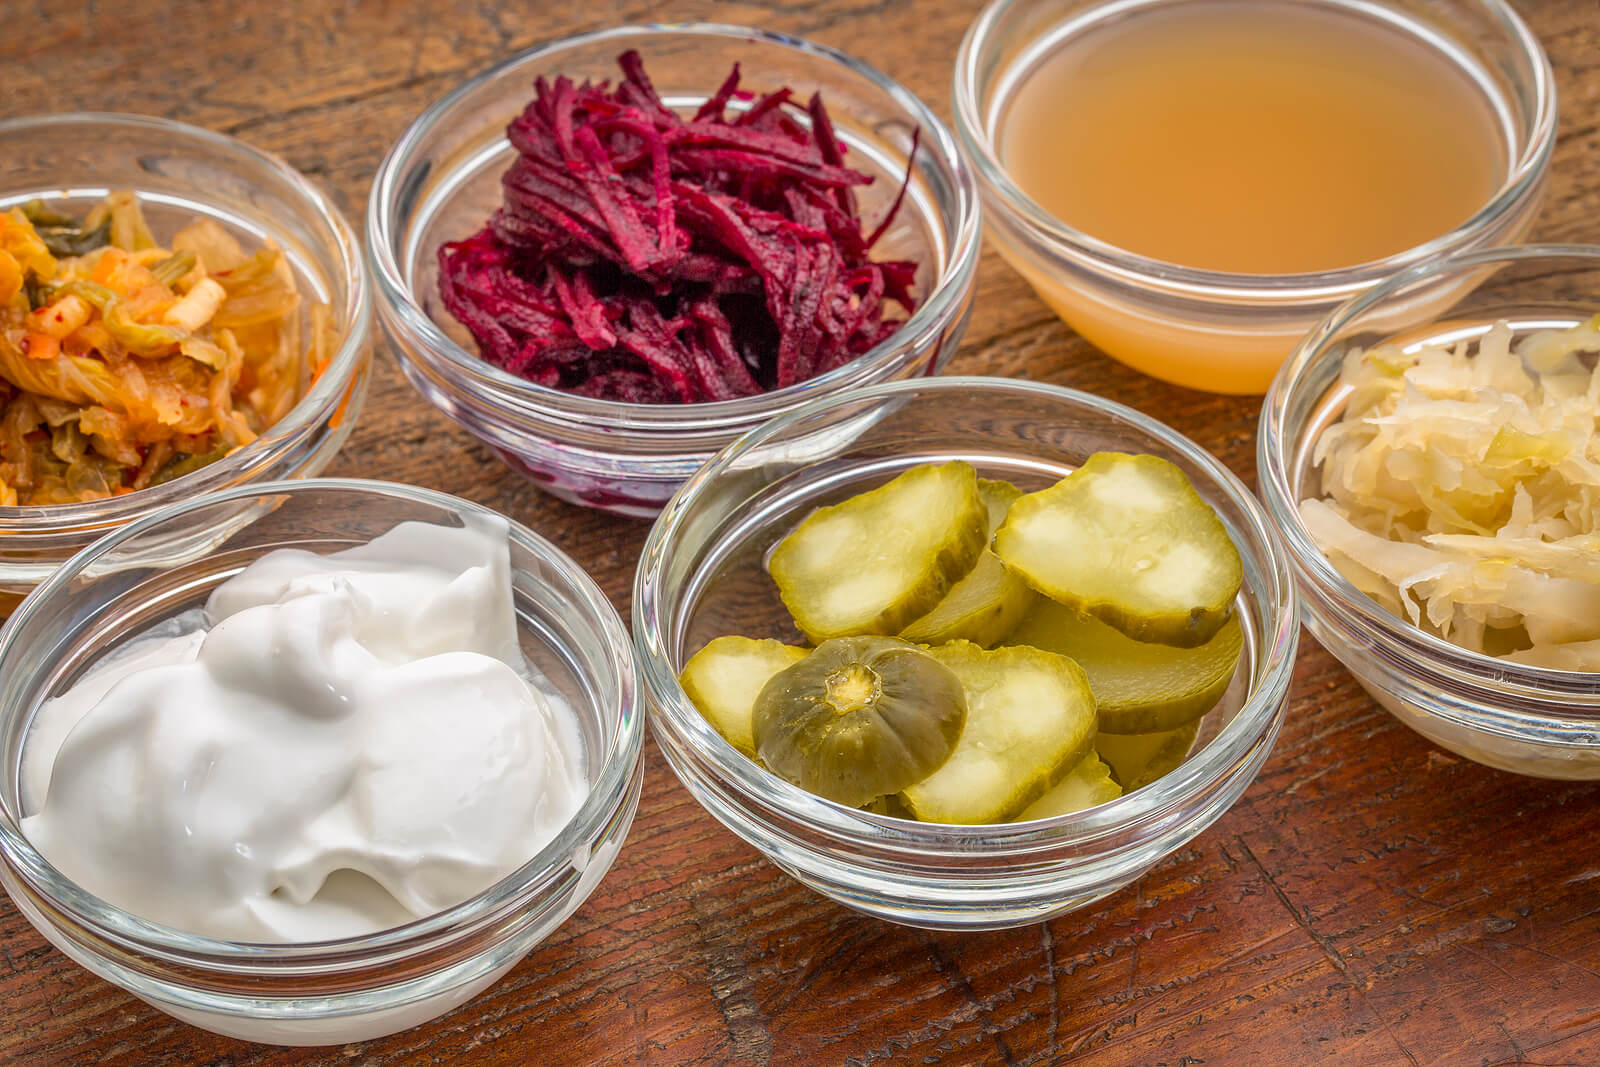 Variety of fermented foods in glass bowls.